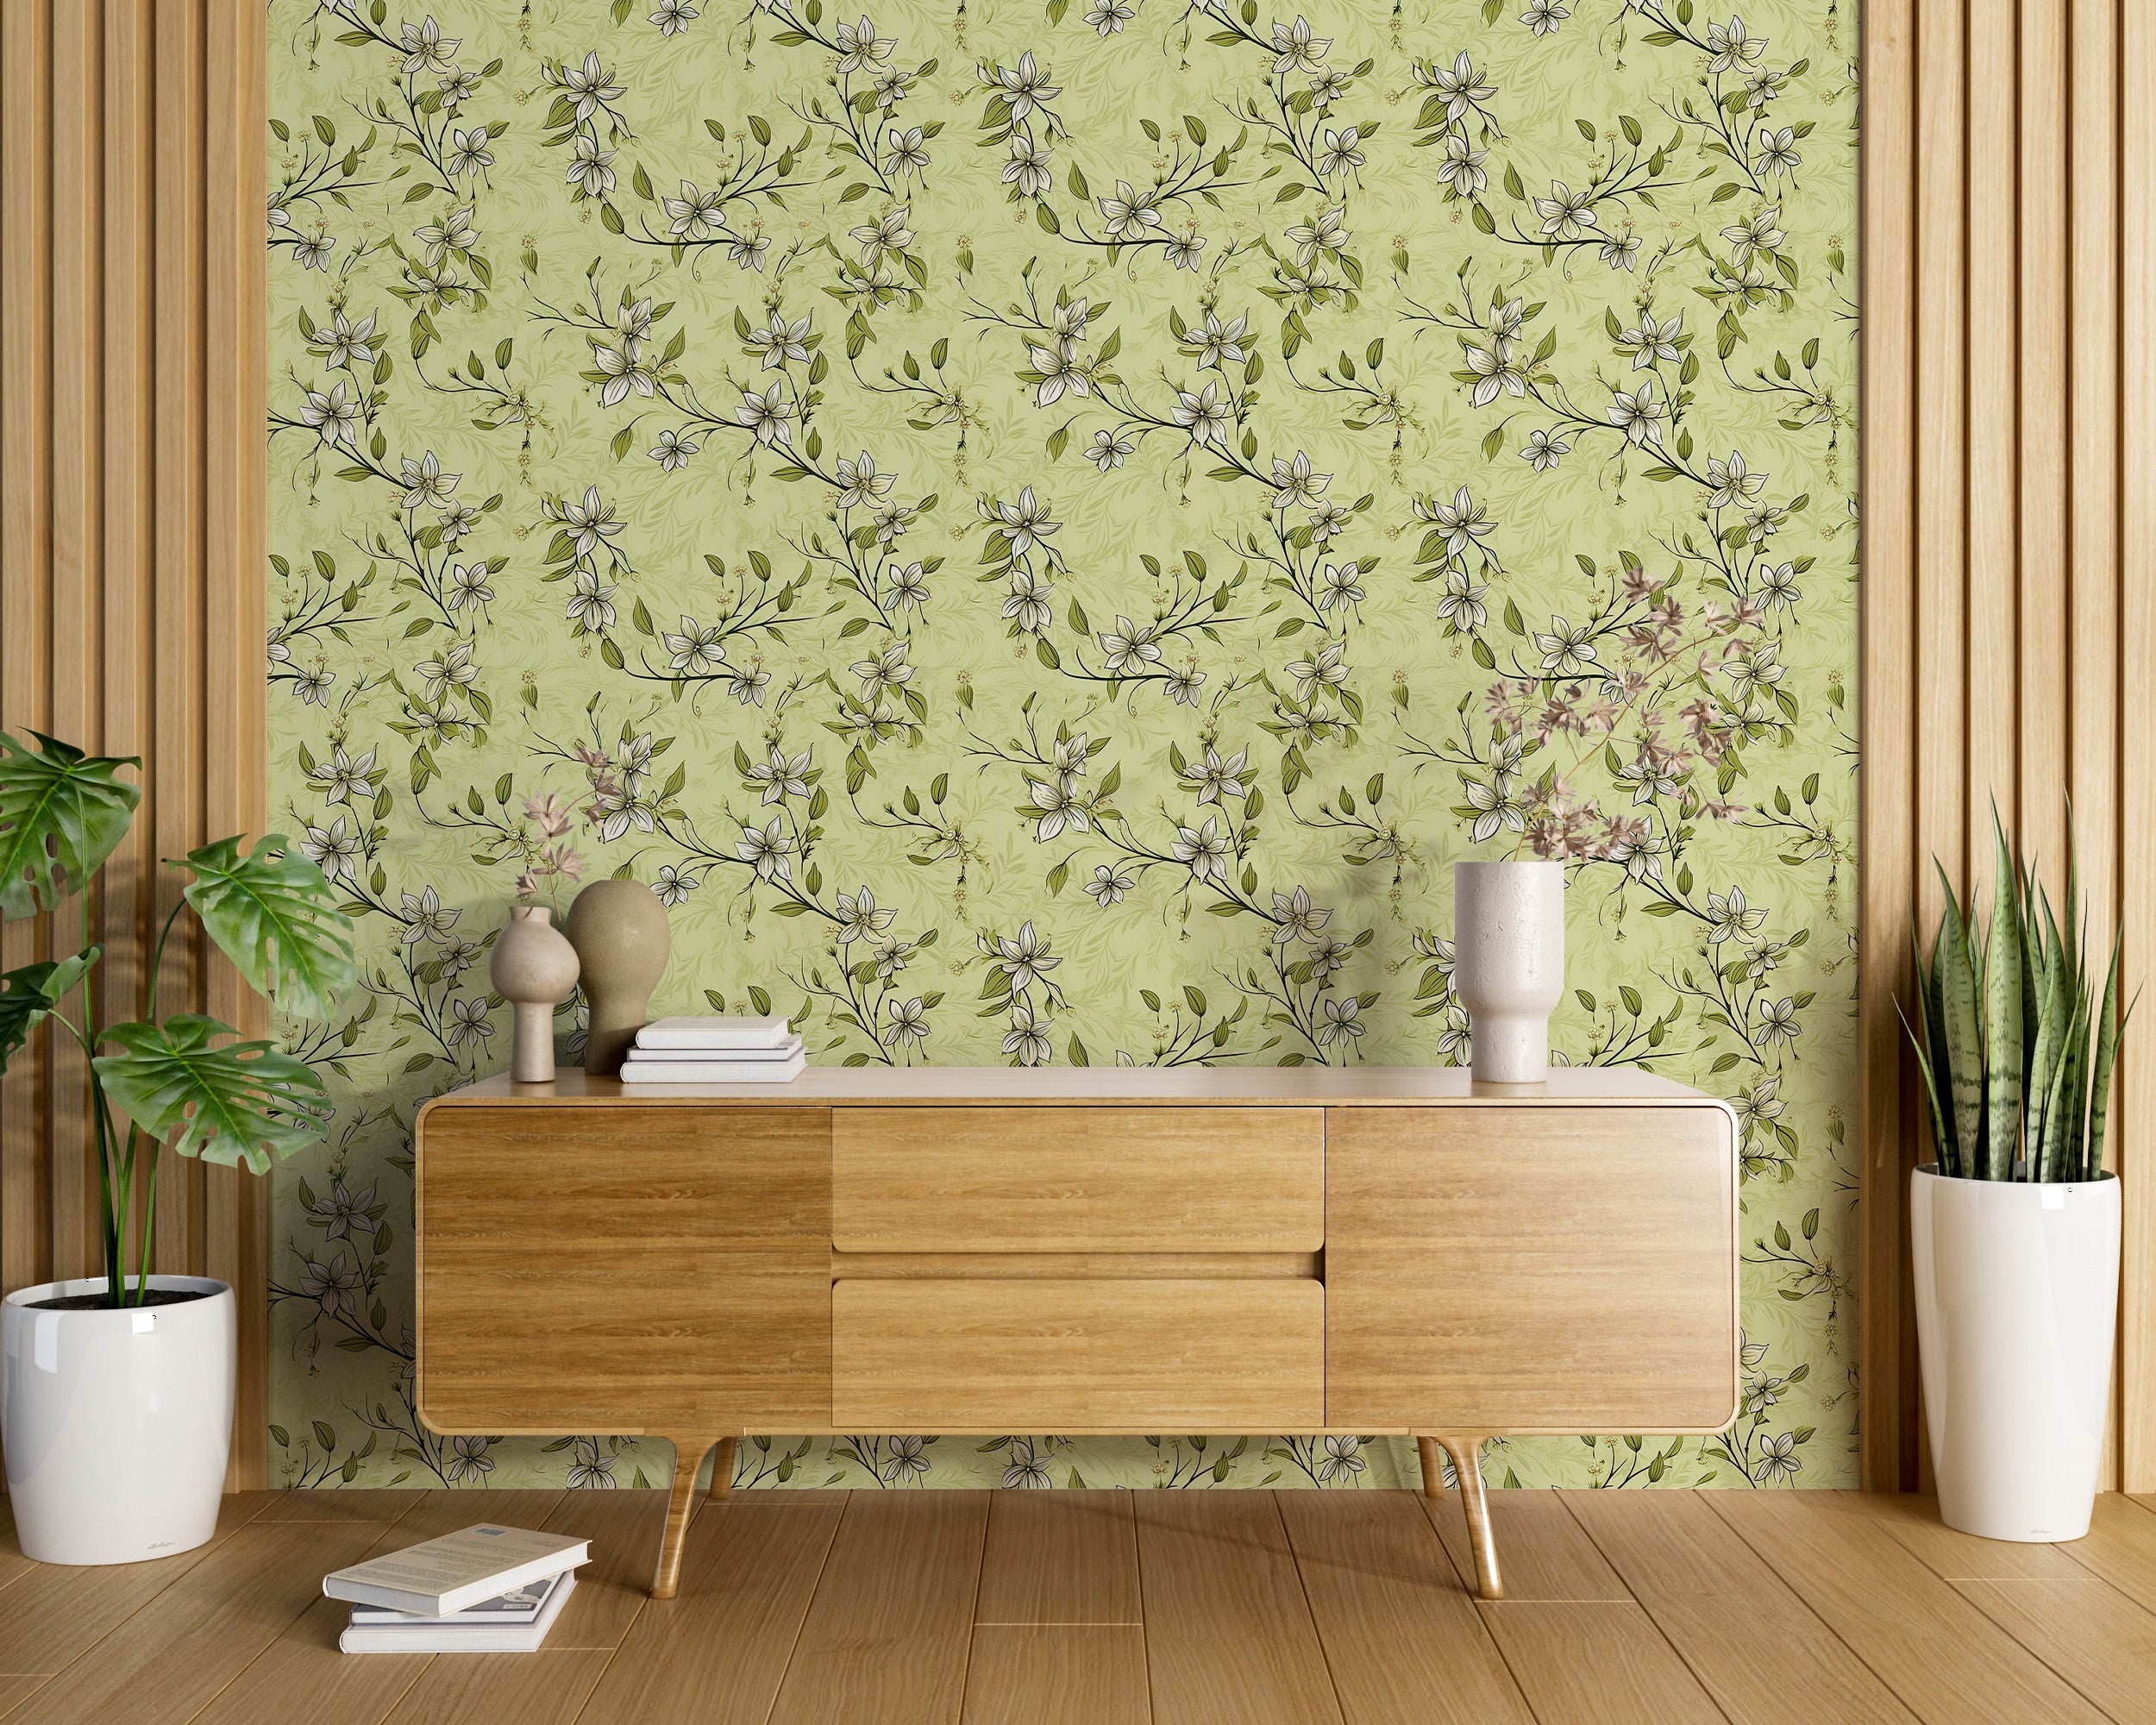 Pistachio Peel and Stick Floral Wallpaper in Room